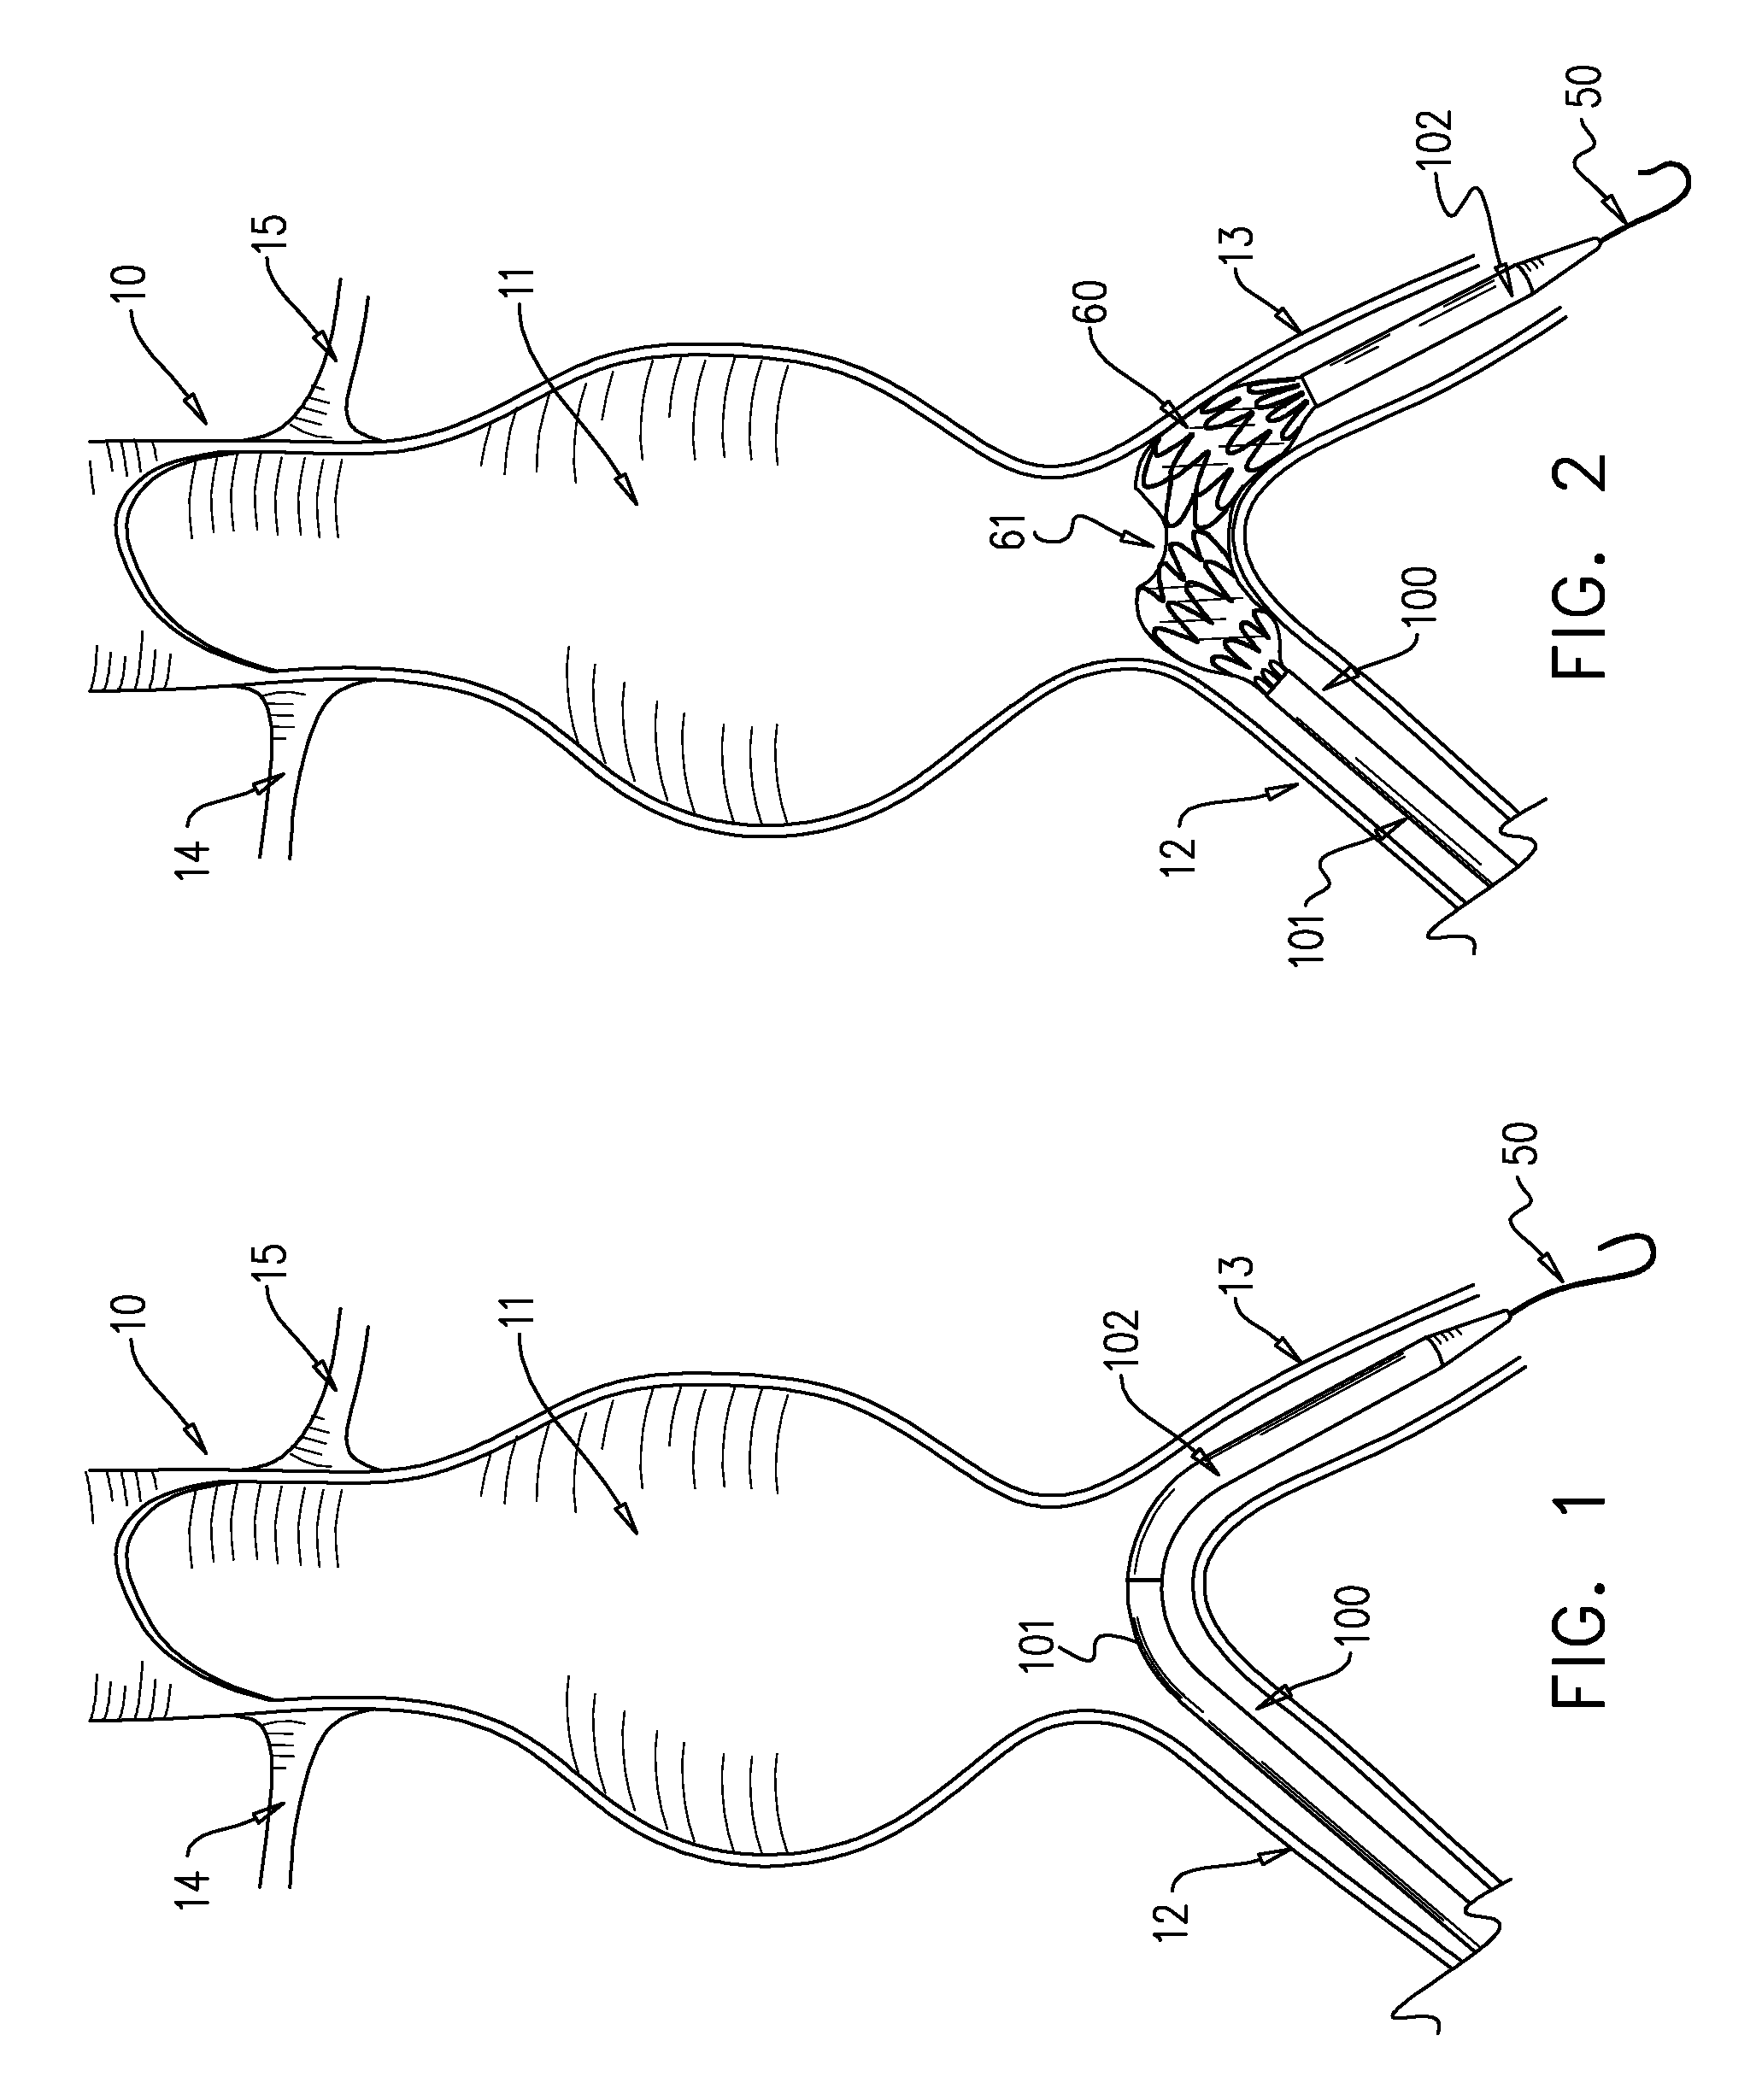 Multi-component expandable supportive bifurcated endoluminal grafts and methods for using same